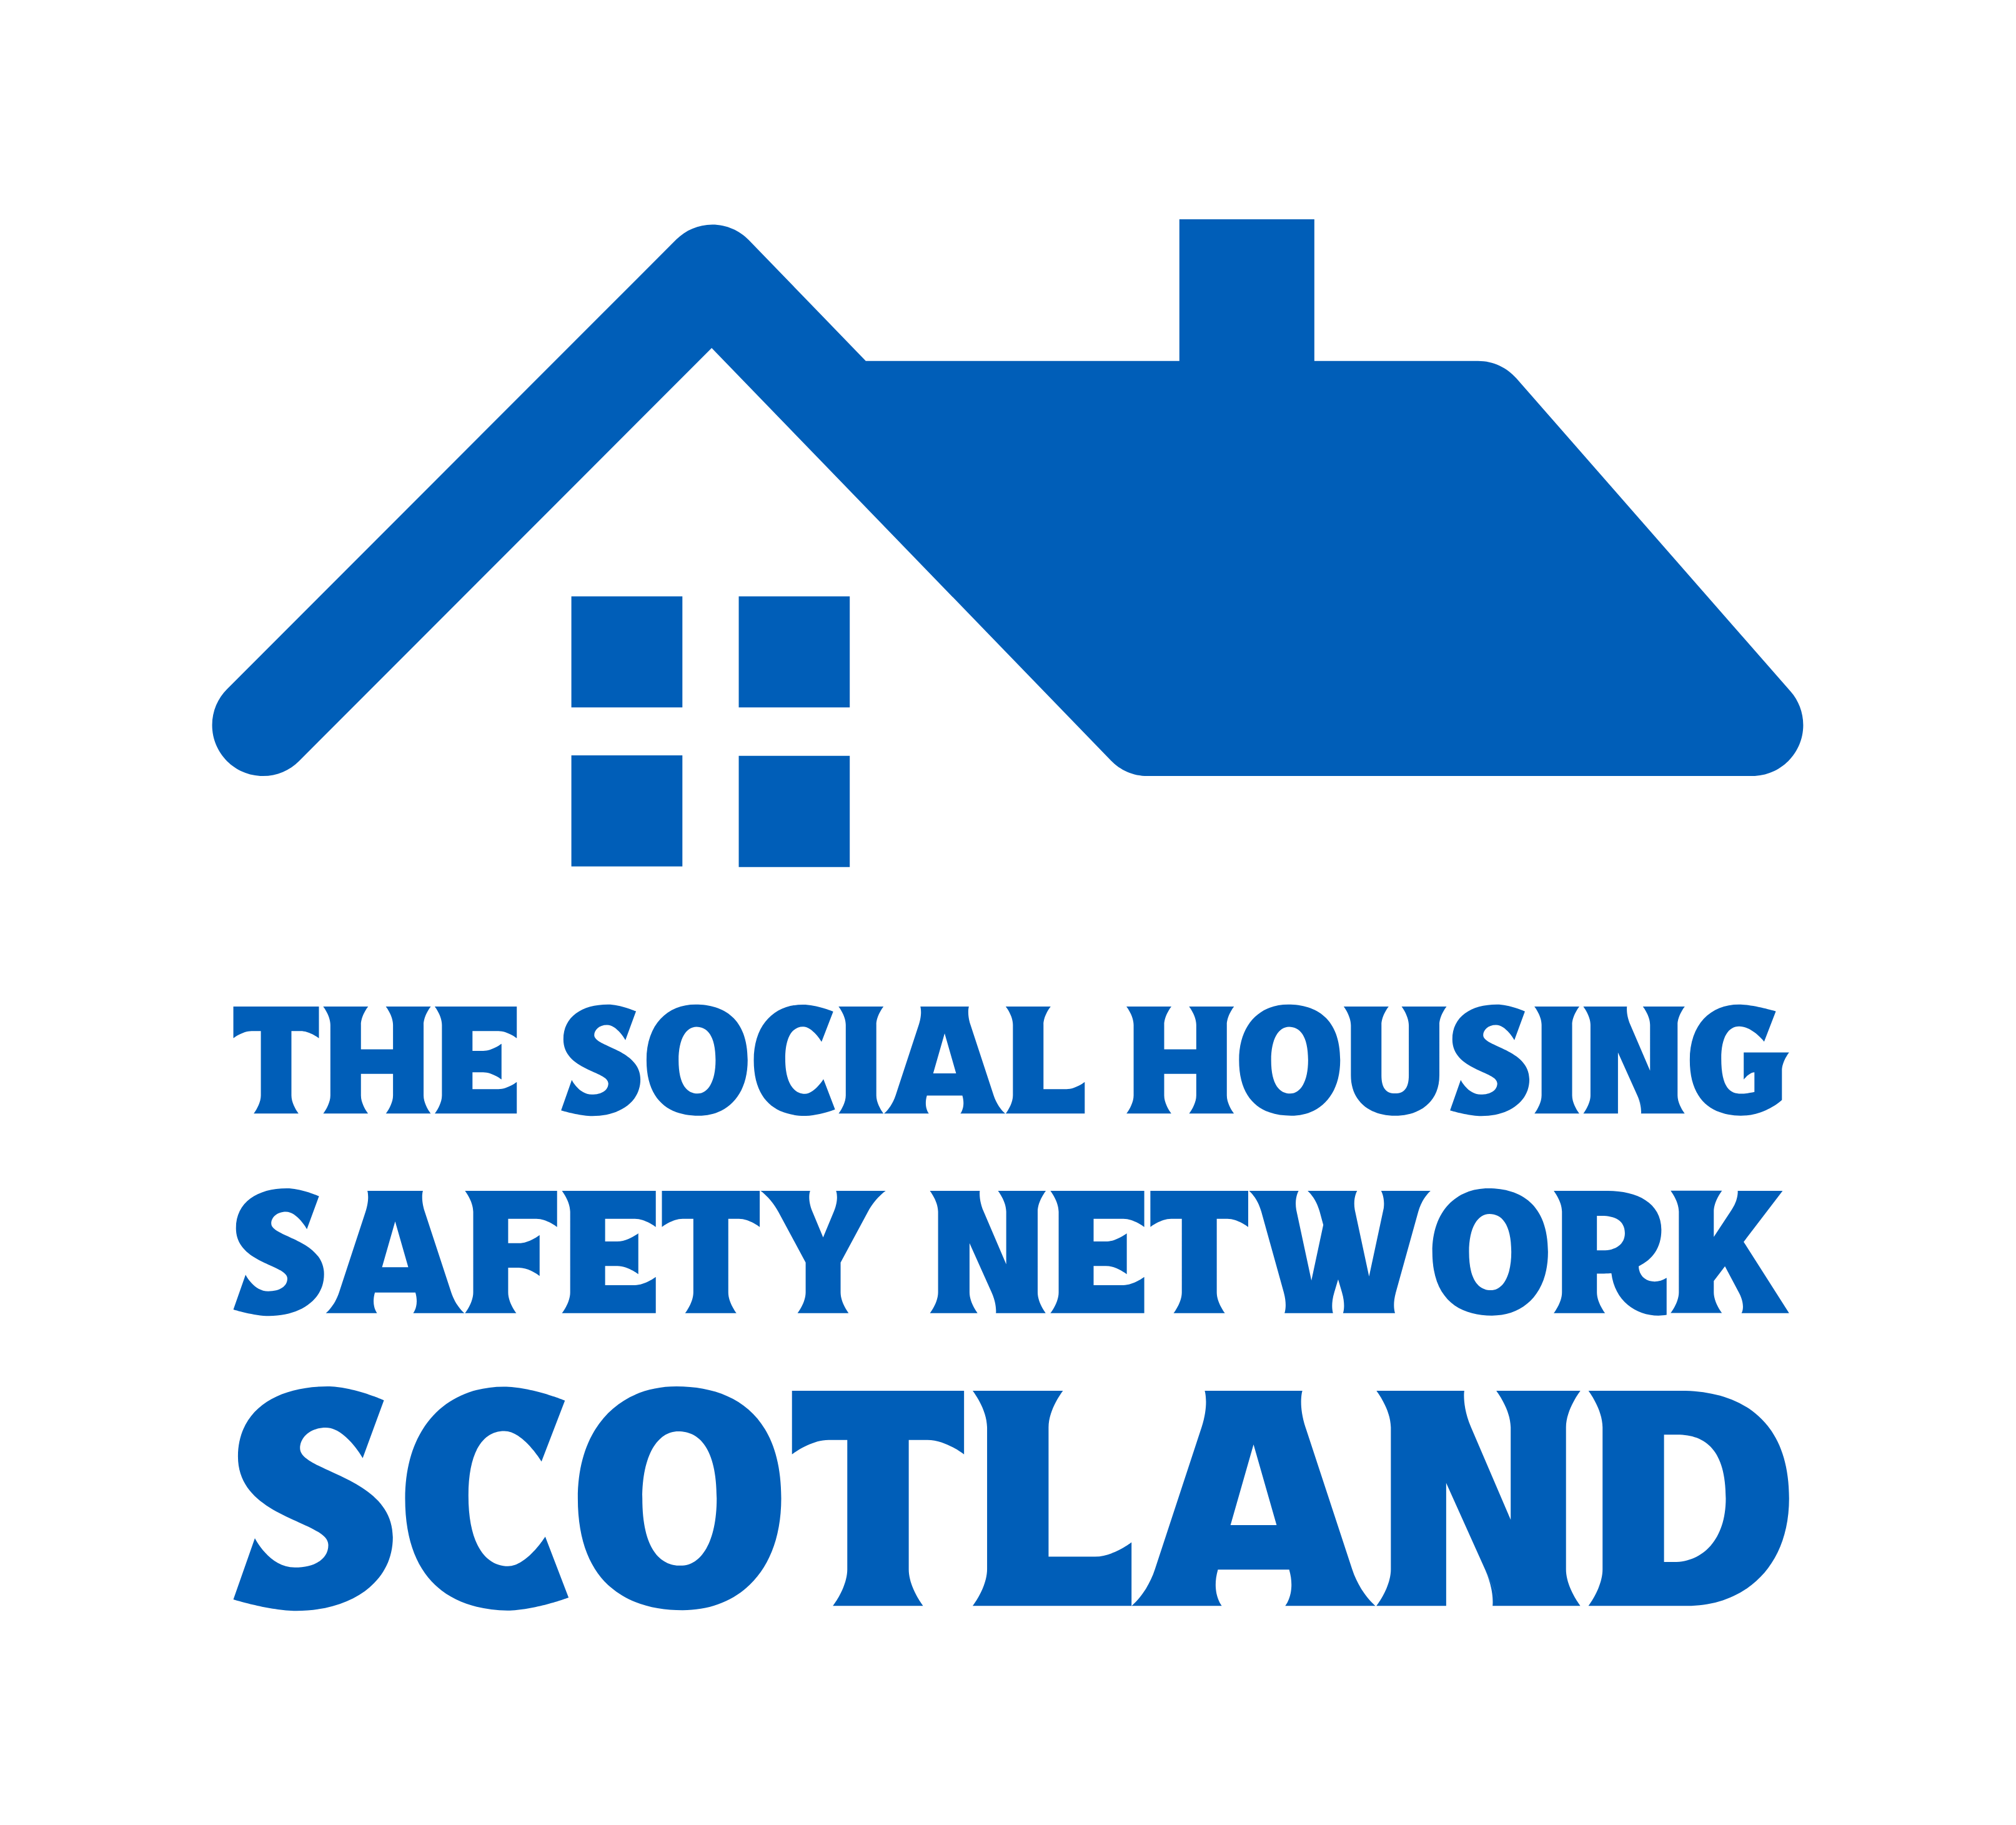 New dedicated tenant and resident safety network for Scotland